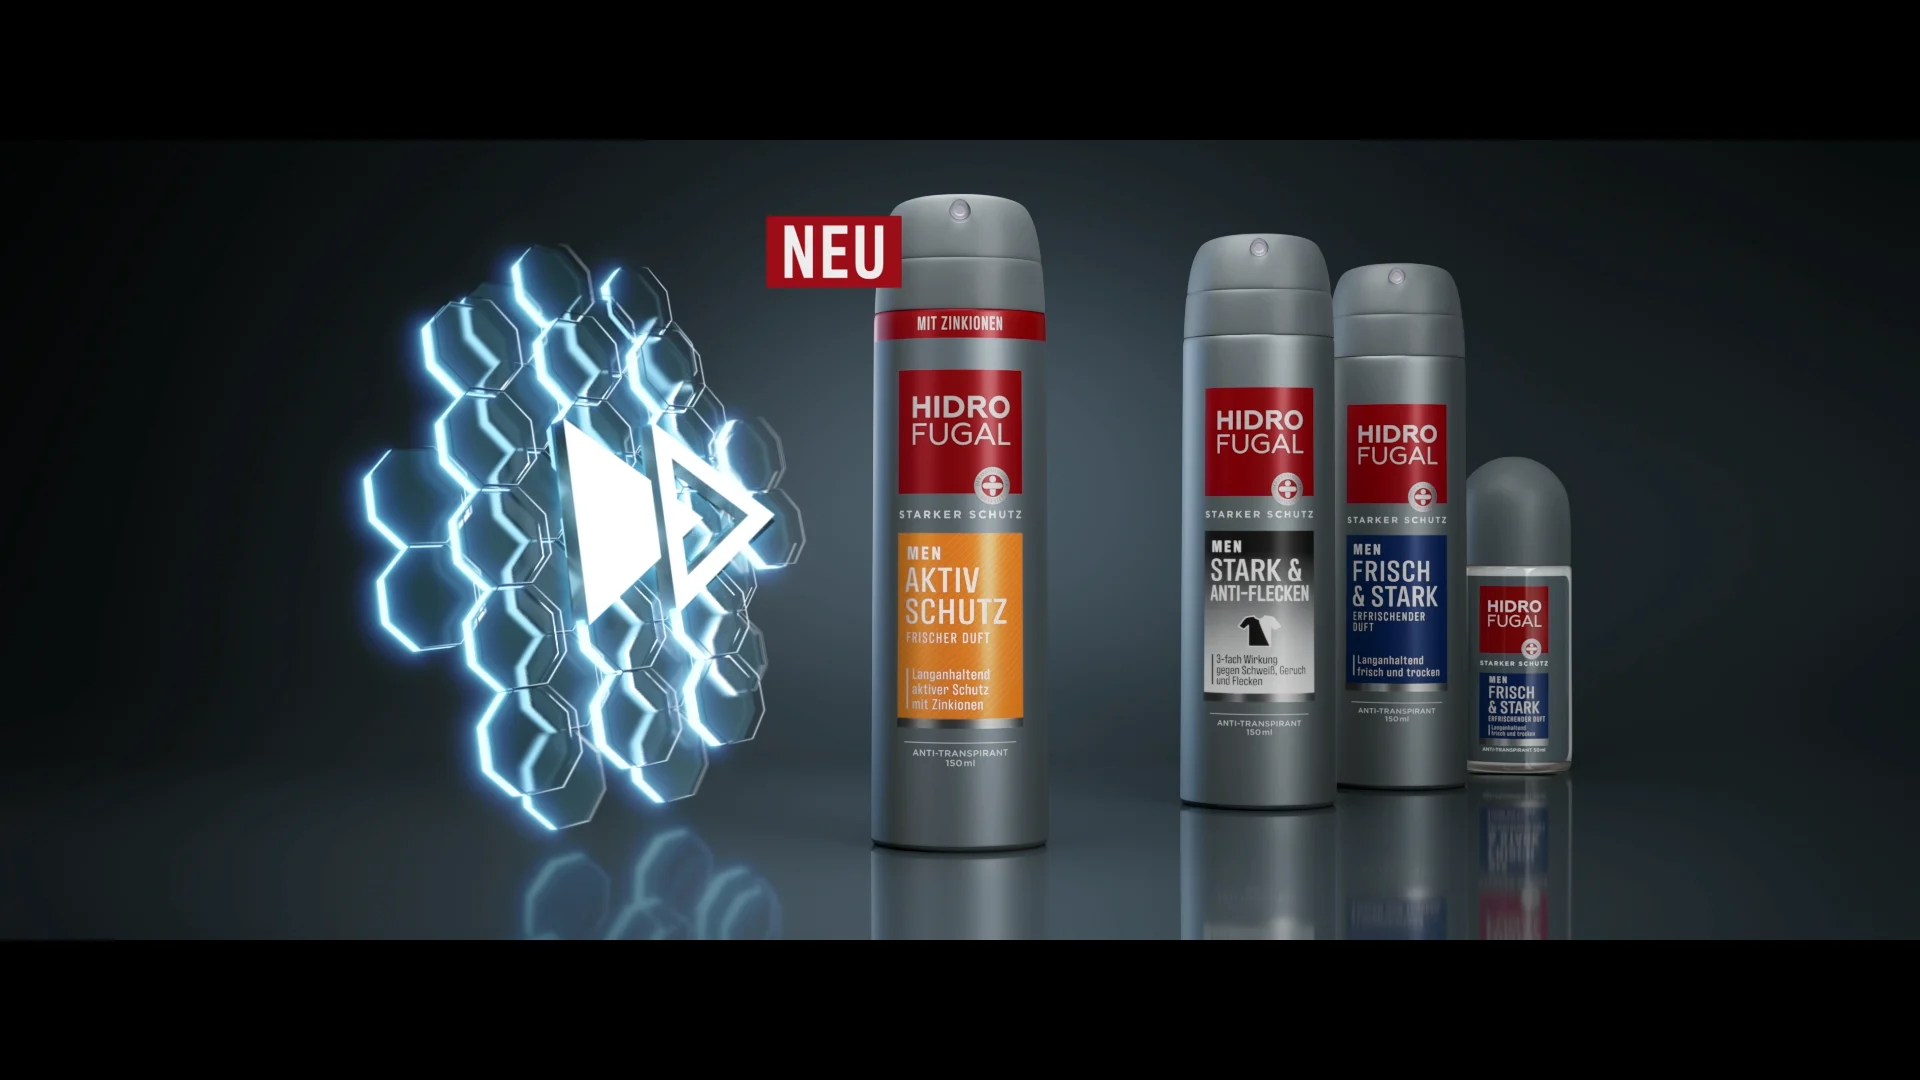 a hidrofugal men packshot containing one hero pack in the middle and three other products on the right side. on the left side there is a call to action button consiting out of a transparent blue honeycomb structure